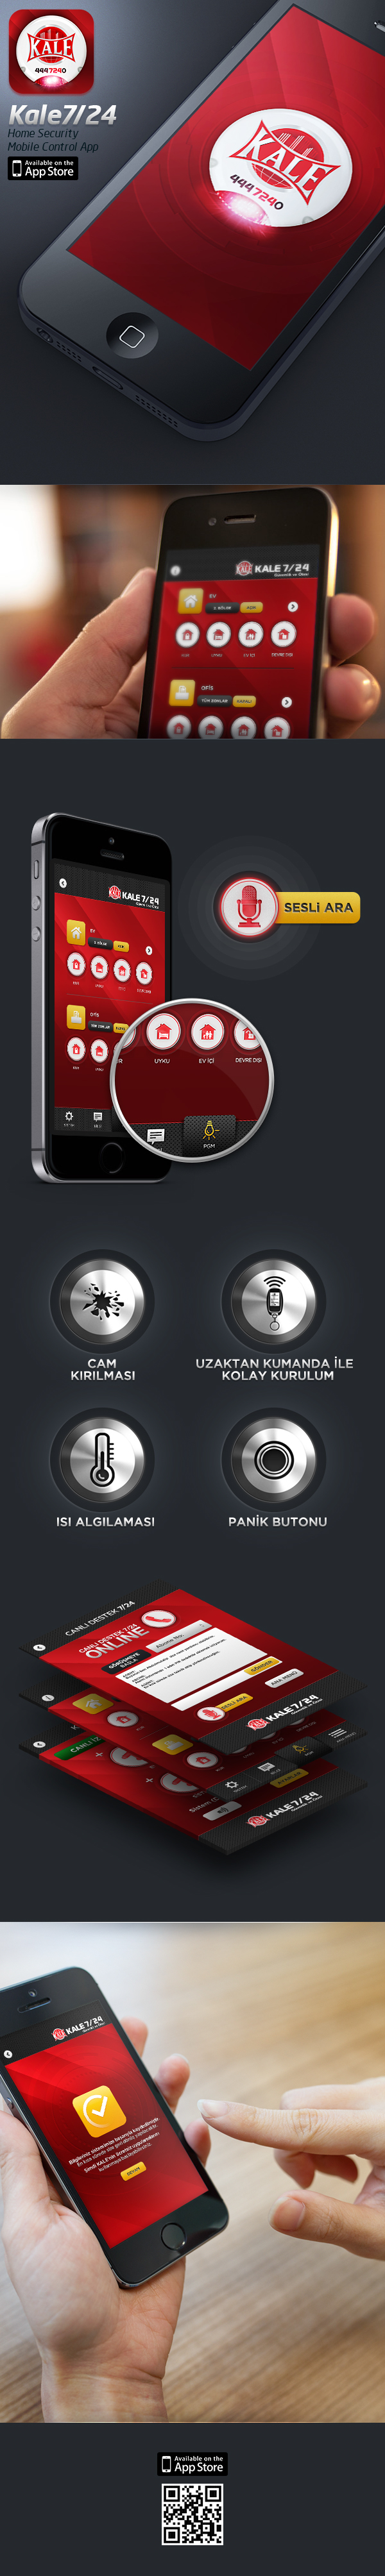 mobile iphone app home Secure system security alarm Kale kale 7/24